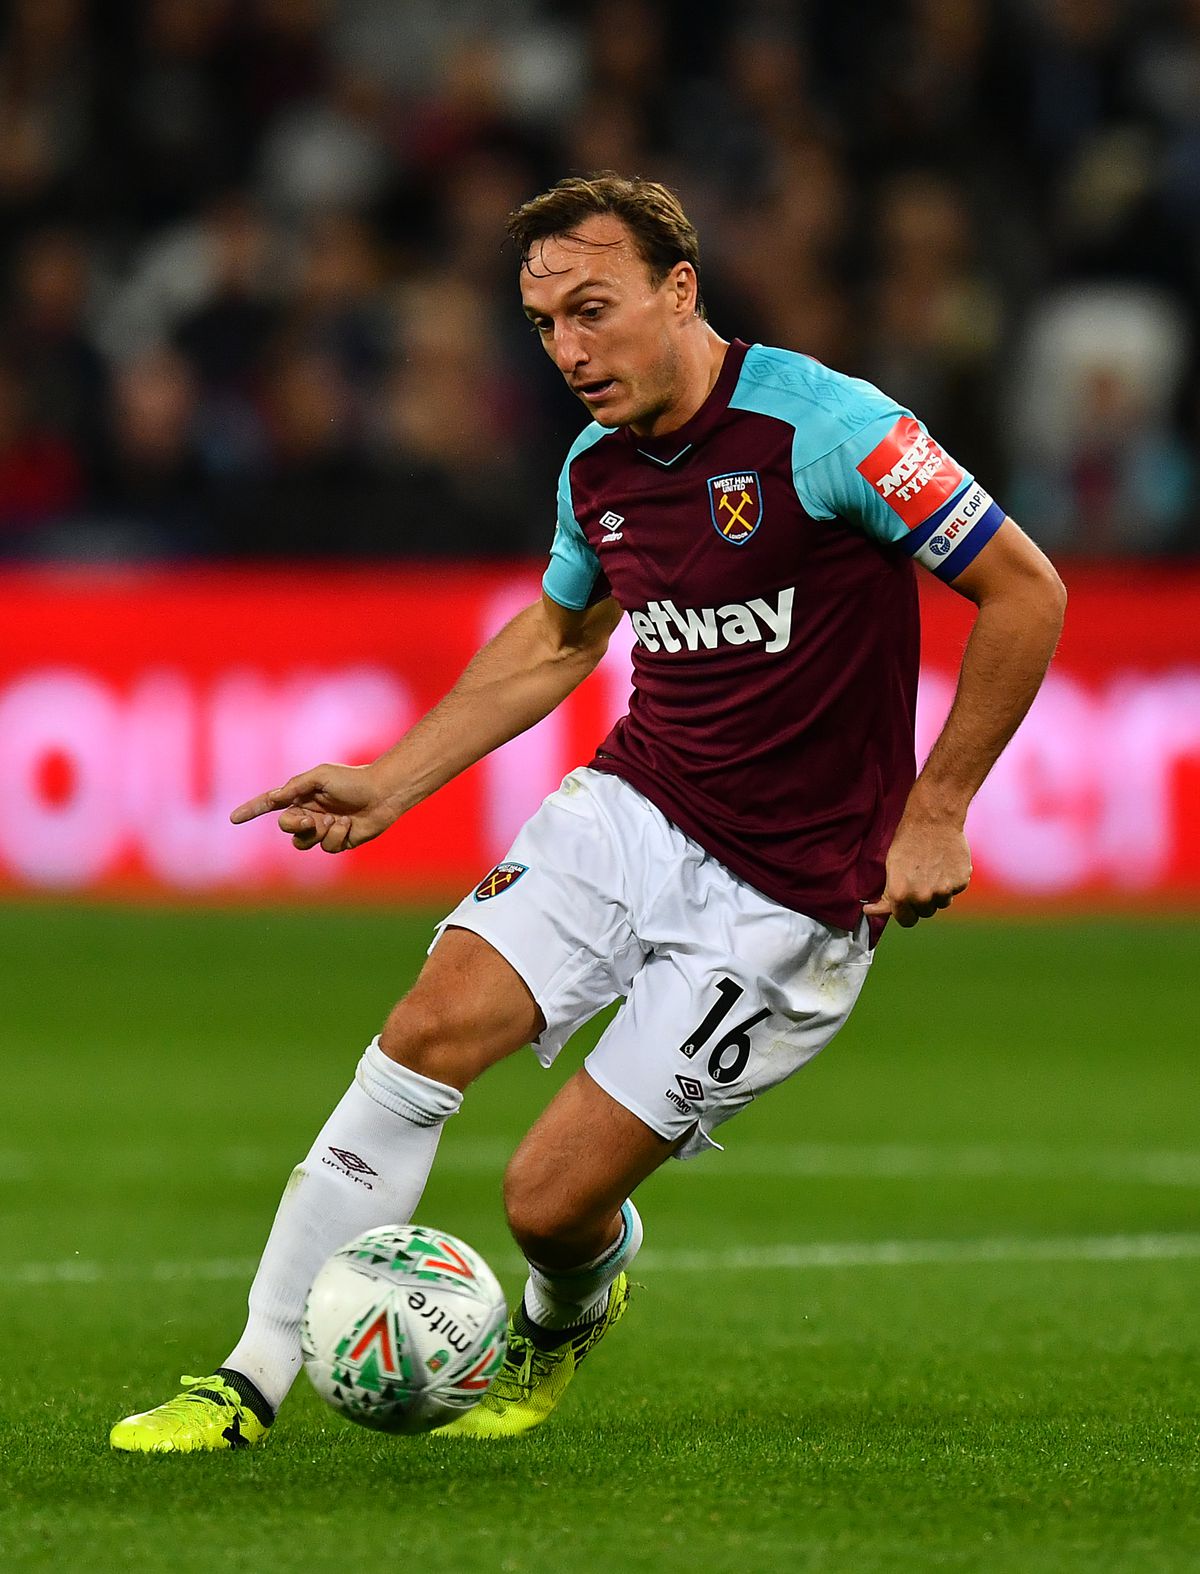 West Ham United v Bolton Wanderers - Carabao Cup Third Round